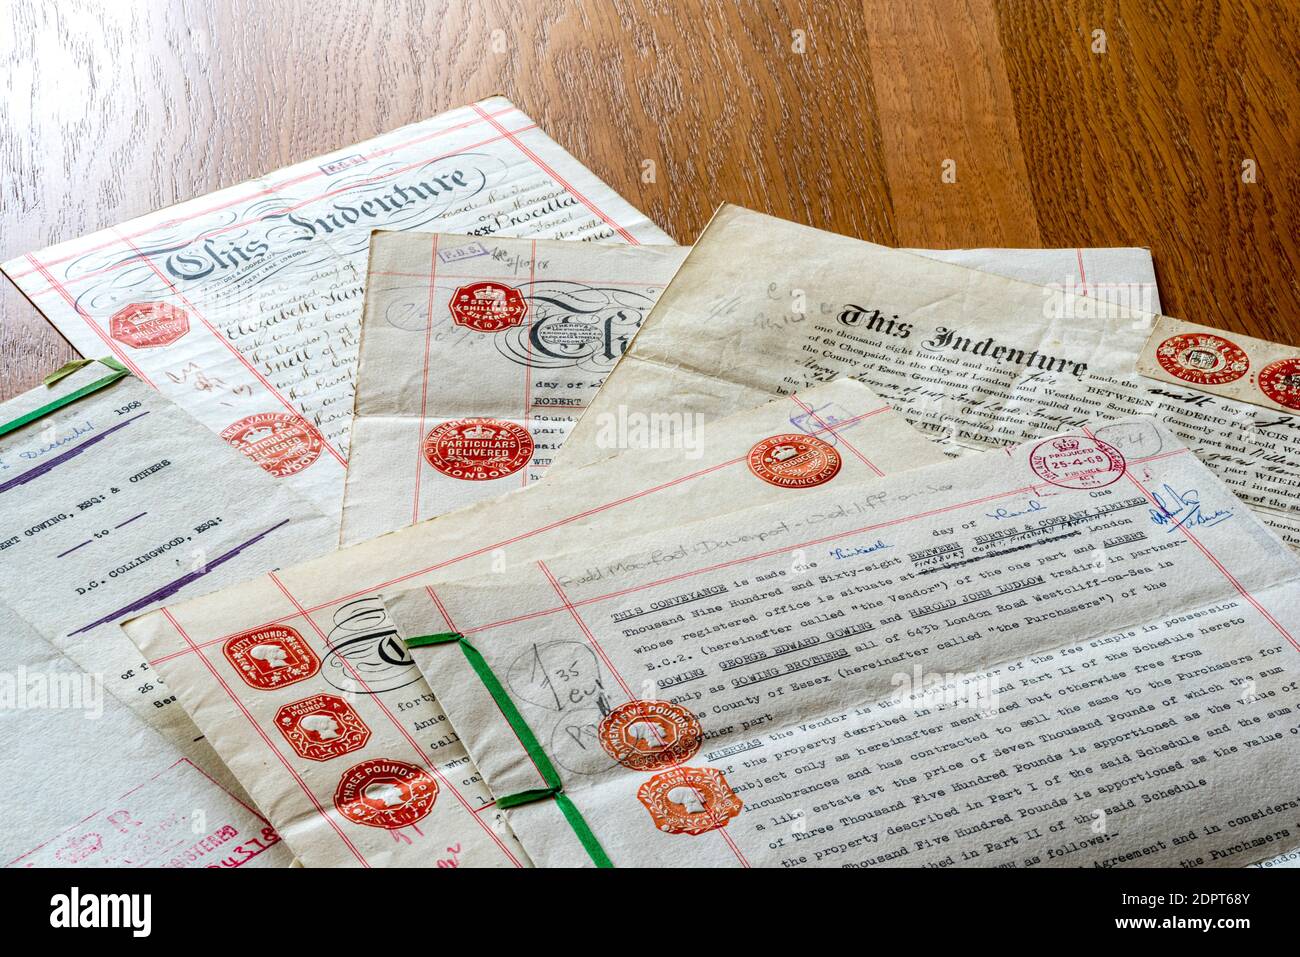 Property ownership documents. Conveyancing papers and certificates from 1895 to 1968. Stock Photo